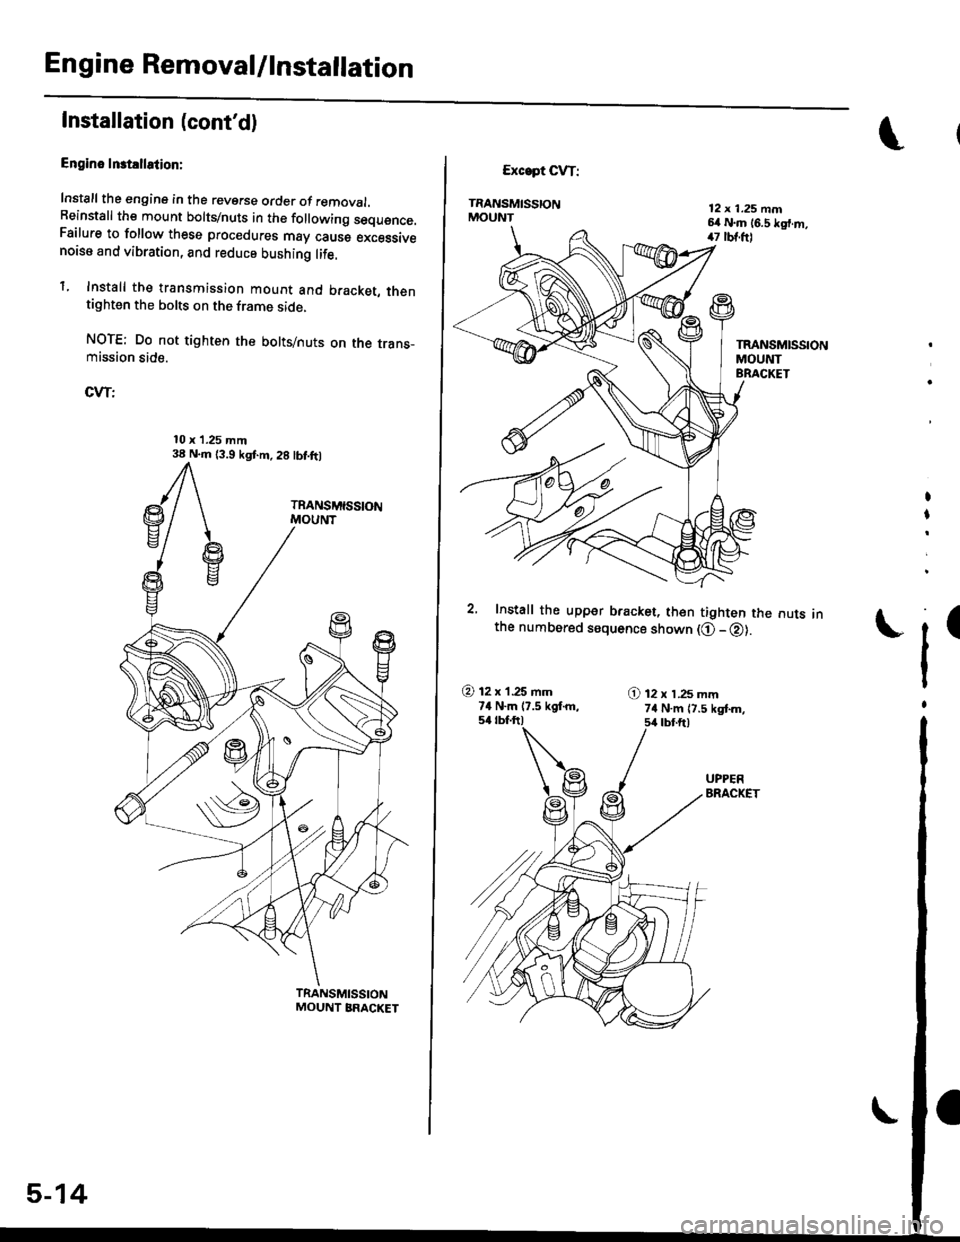 HONDA CIVIC 1996 6.G Workshop Manual Engine Removal/lnstallation
Installation (contd)
Engino Inst!llation:
Install the engine in the reverse order of removal.Beinstall the mount bolts/nuts in the following sequence.Failure to follow the